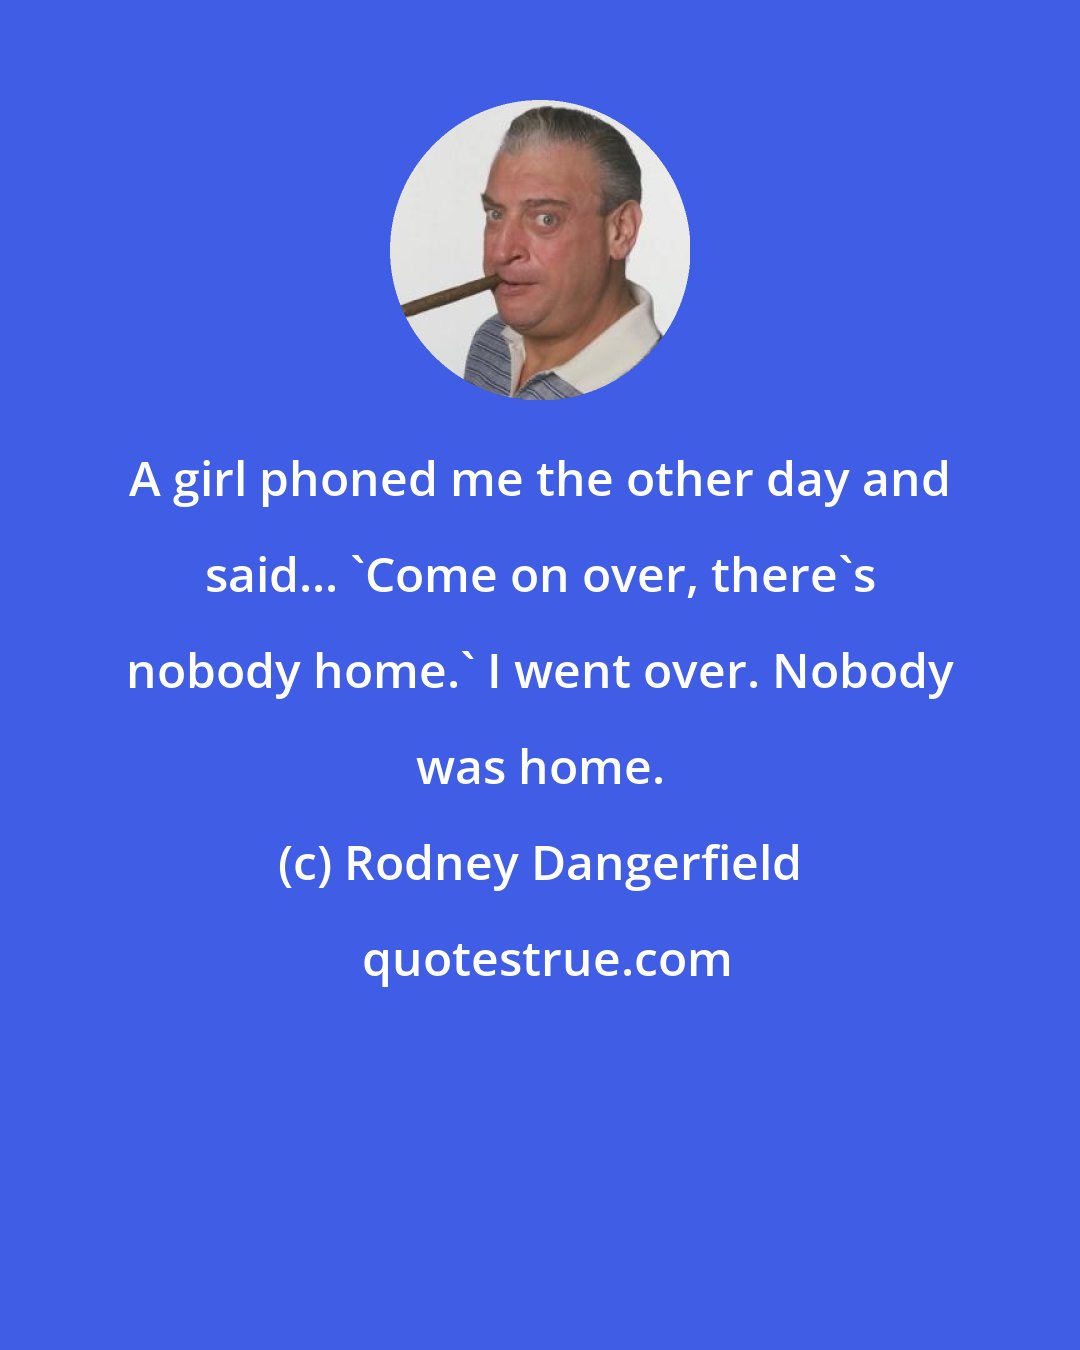 Rodney Dangerfield: A girl phoned me the other day and said... 'Come on over, there's nobody home.' I went over. Nobody was home.